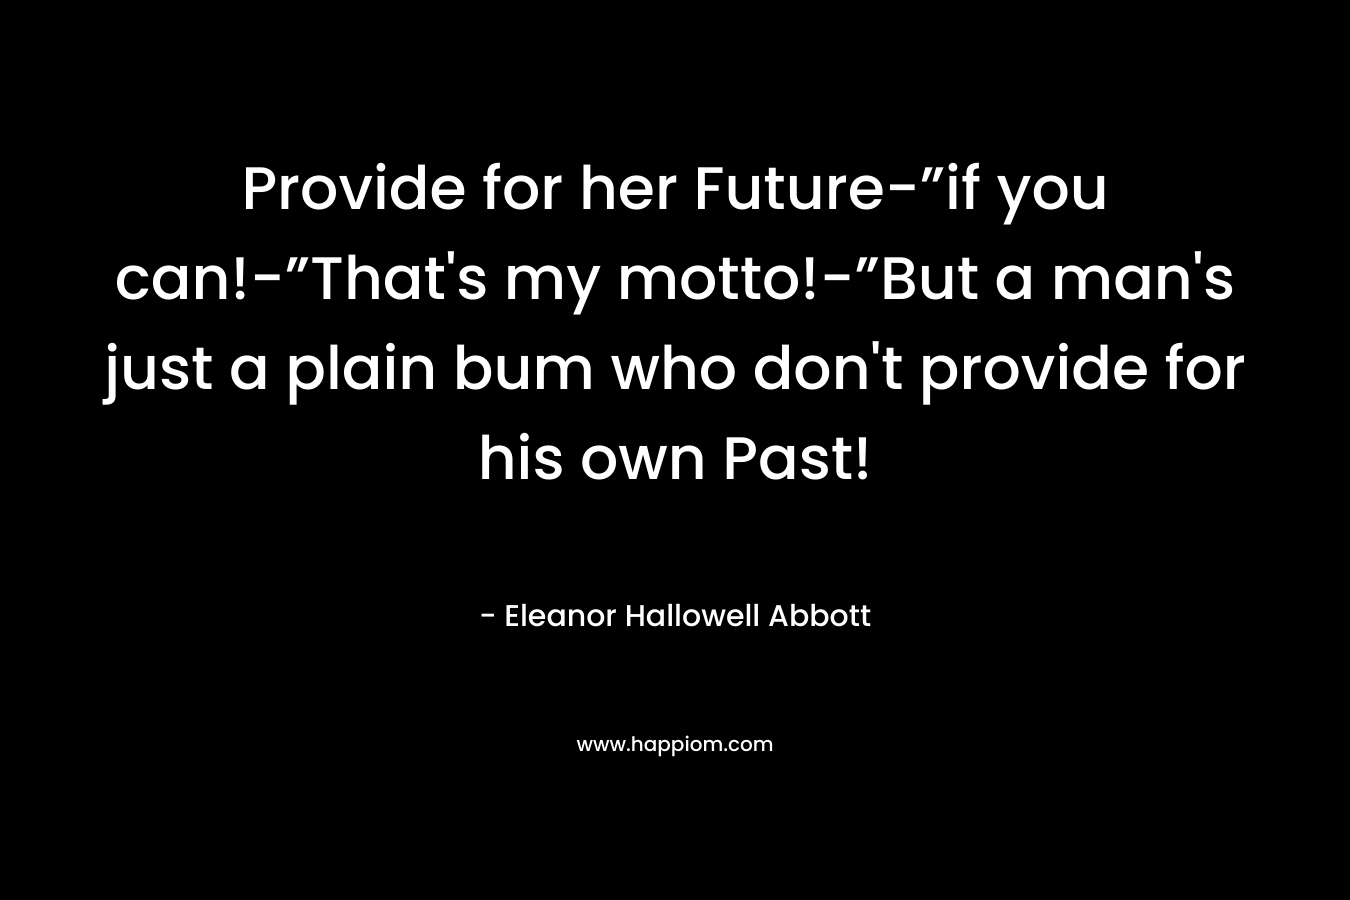 Provide for her Future-”if you can!-”That’s my motto!-”But a man’s just a plain bum who don’t provide for his own Past! – Eleanor Hallowell Abbott